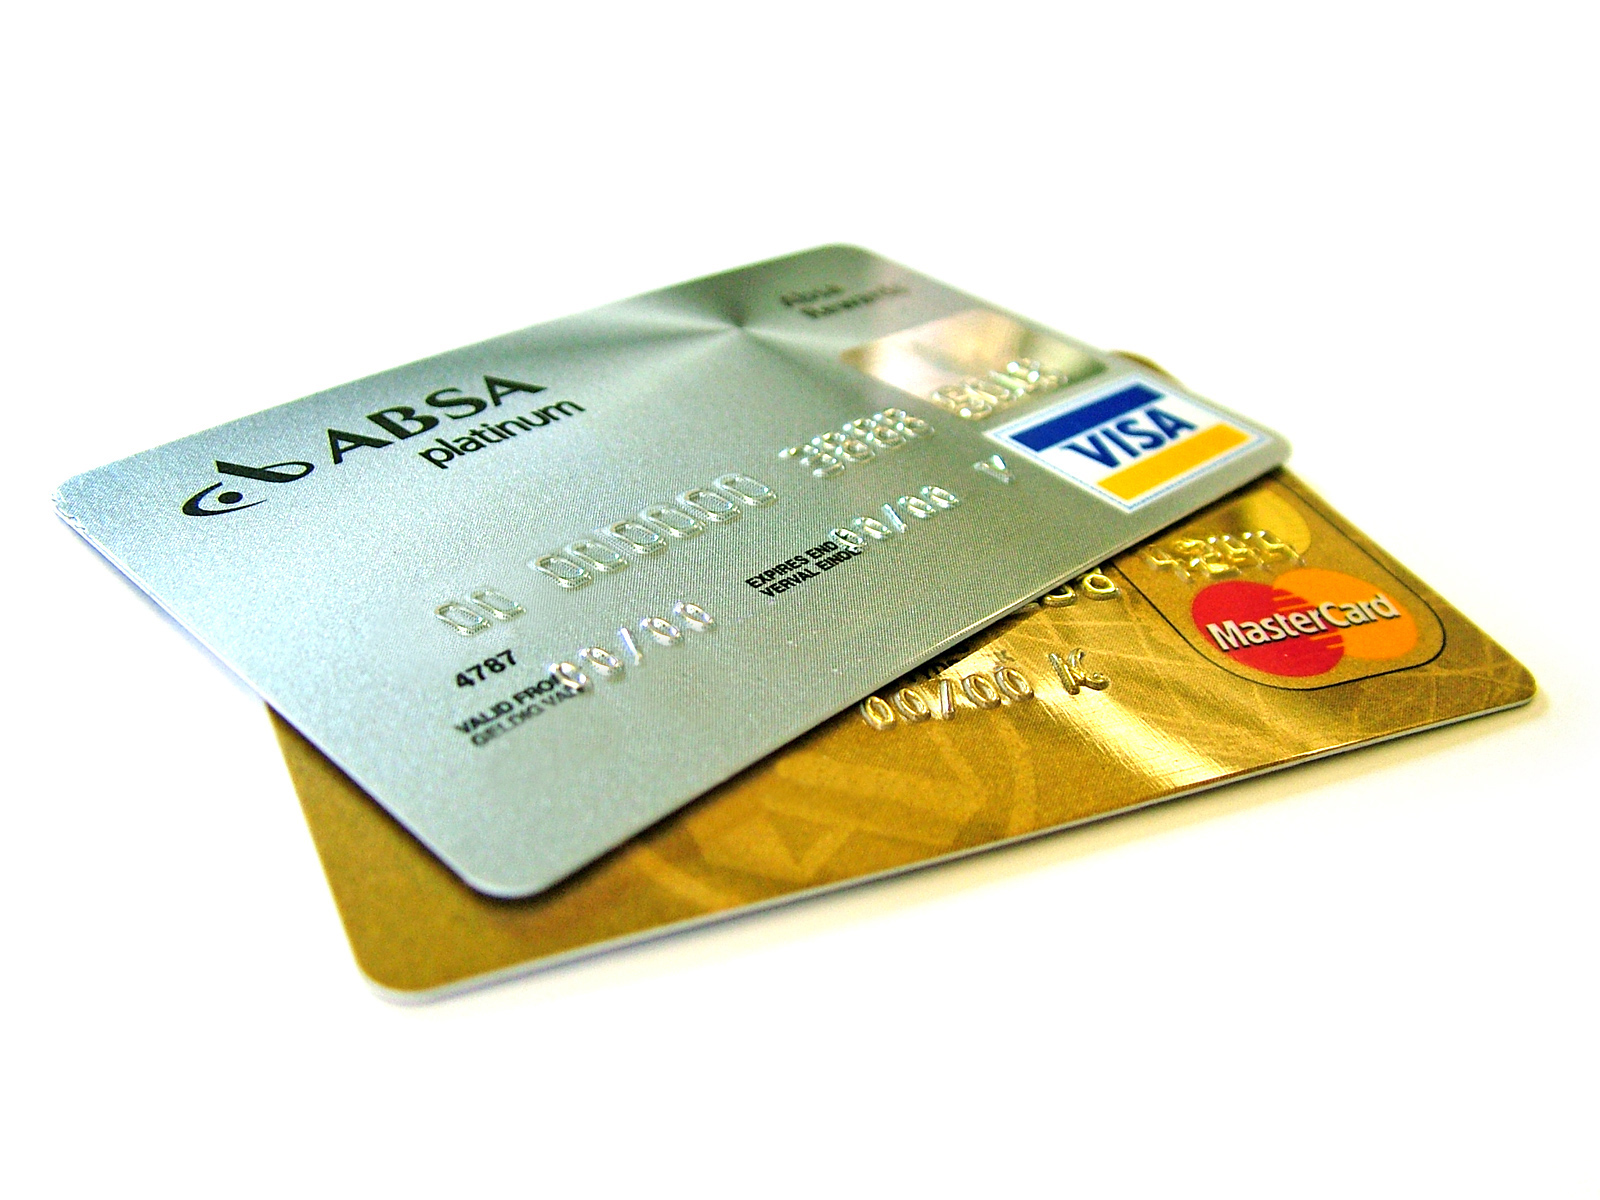 Depicts credit cards